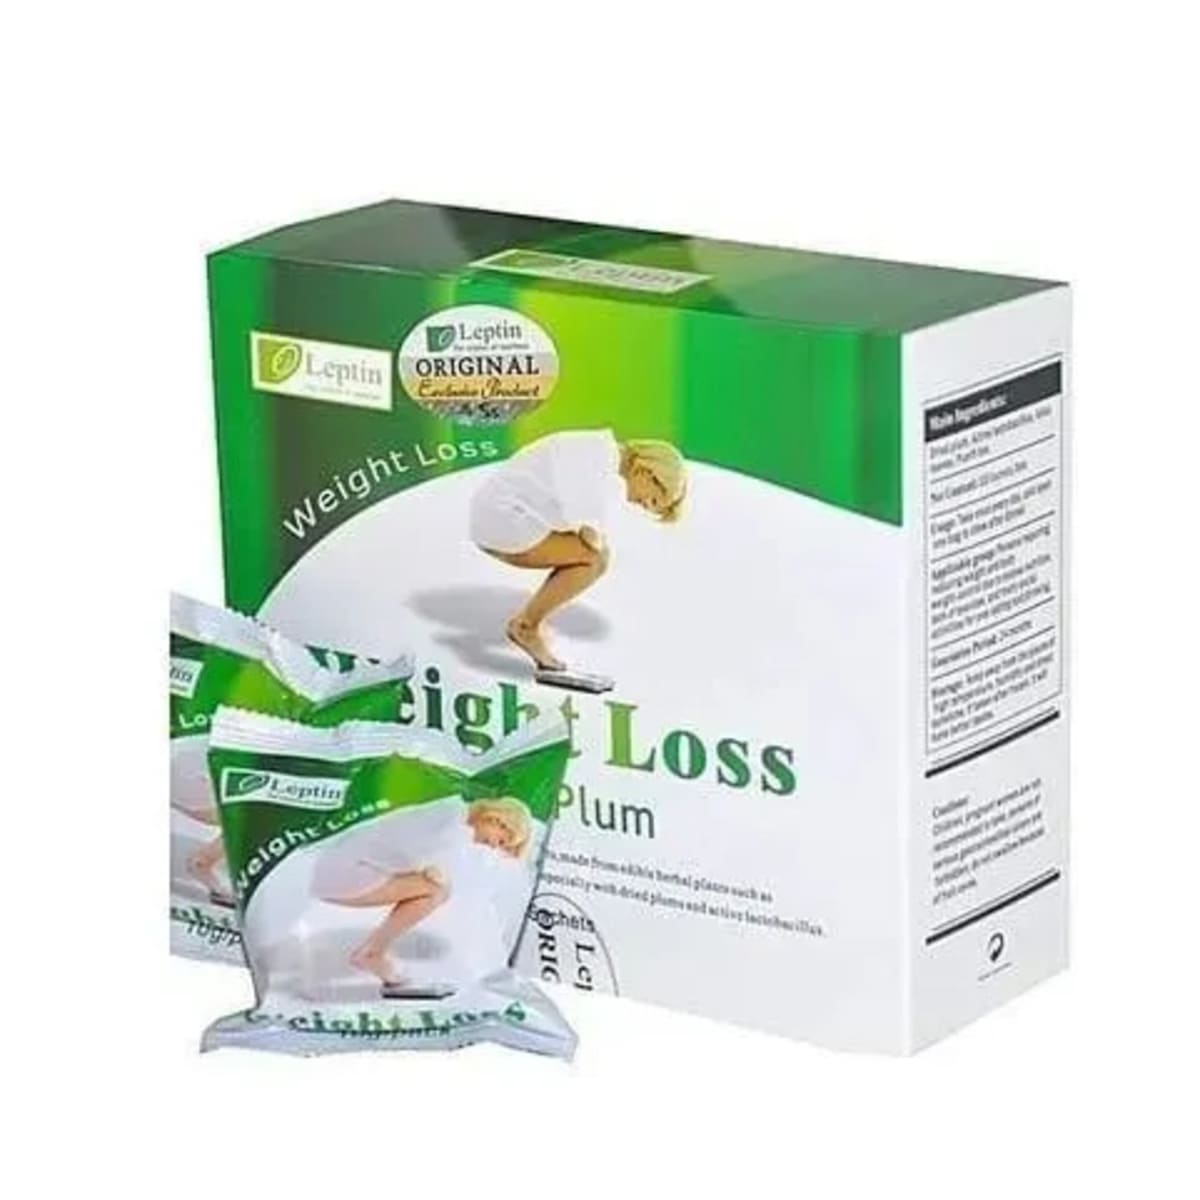 Quick Slim Natural Weight Loss Tea - Fast Action - 20 Sachets